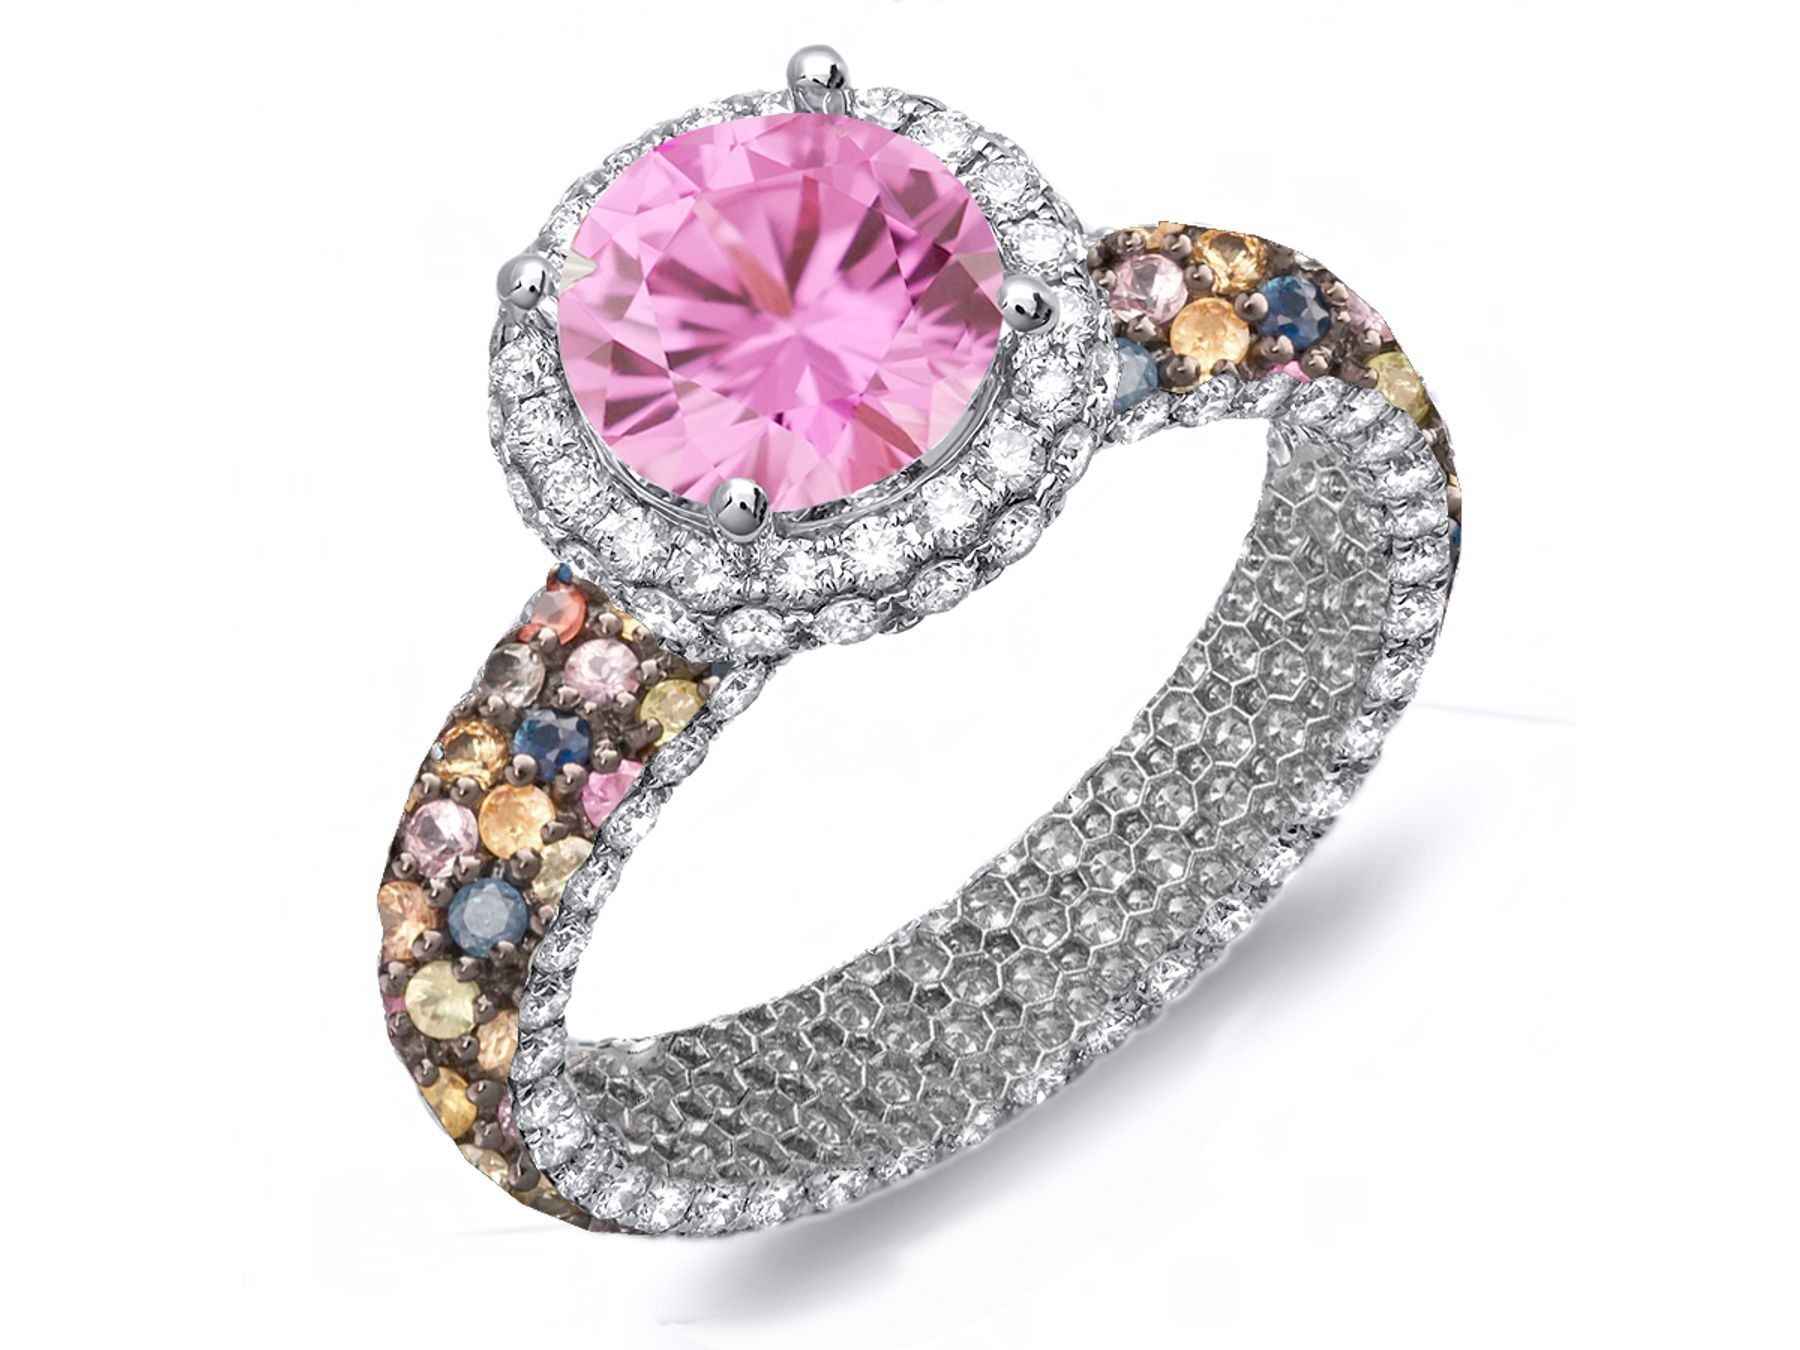 Made To Order Rings Featuring Delicate French Halo Pave Diamonds & Multi-Colored Gemstones